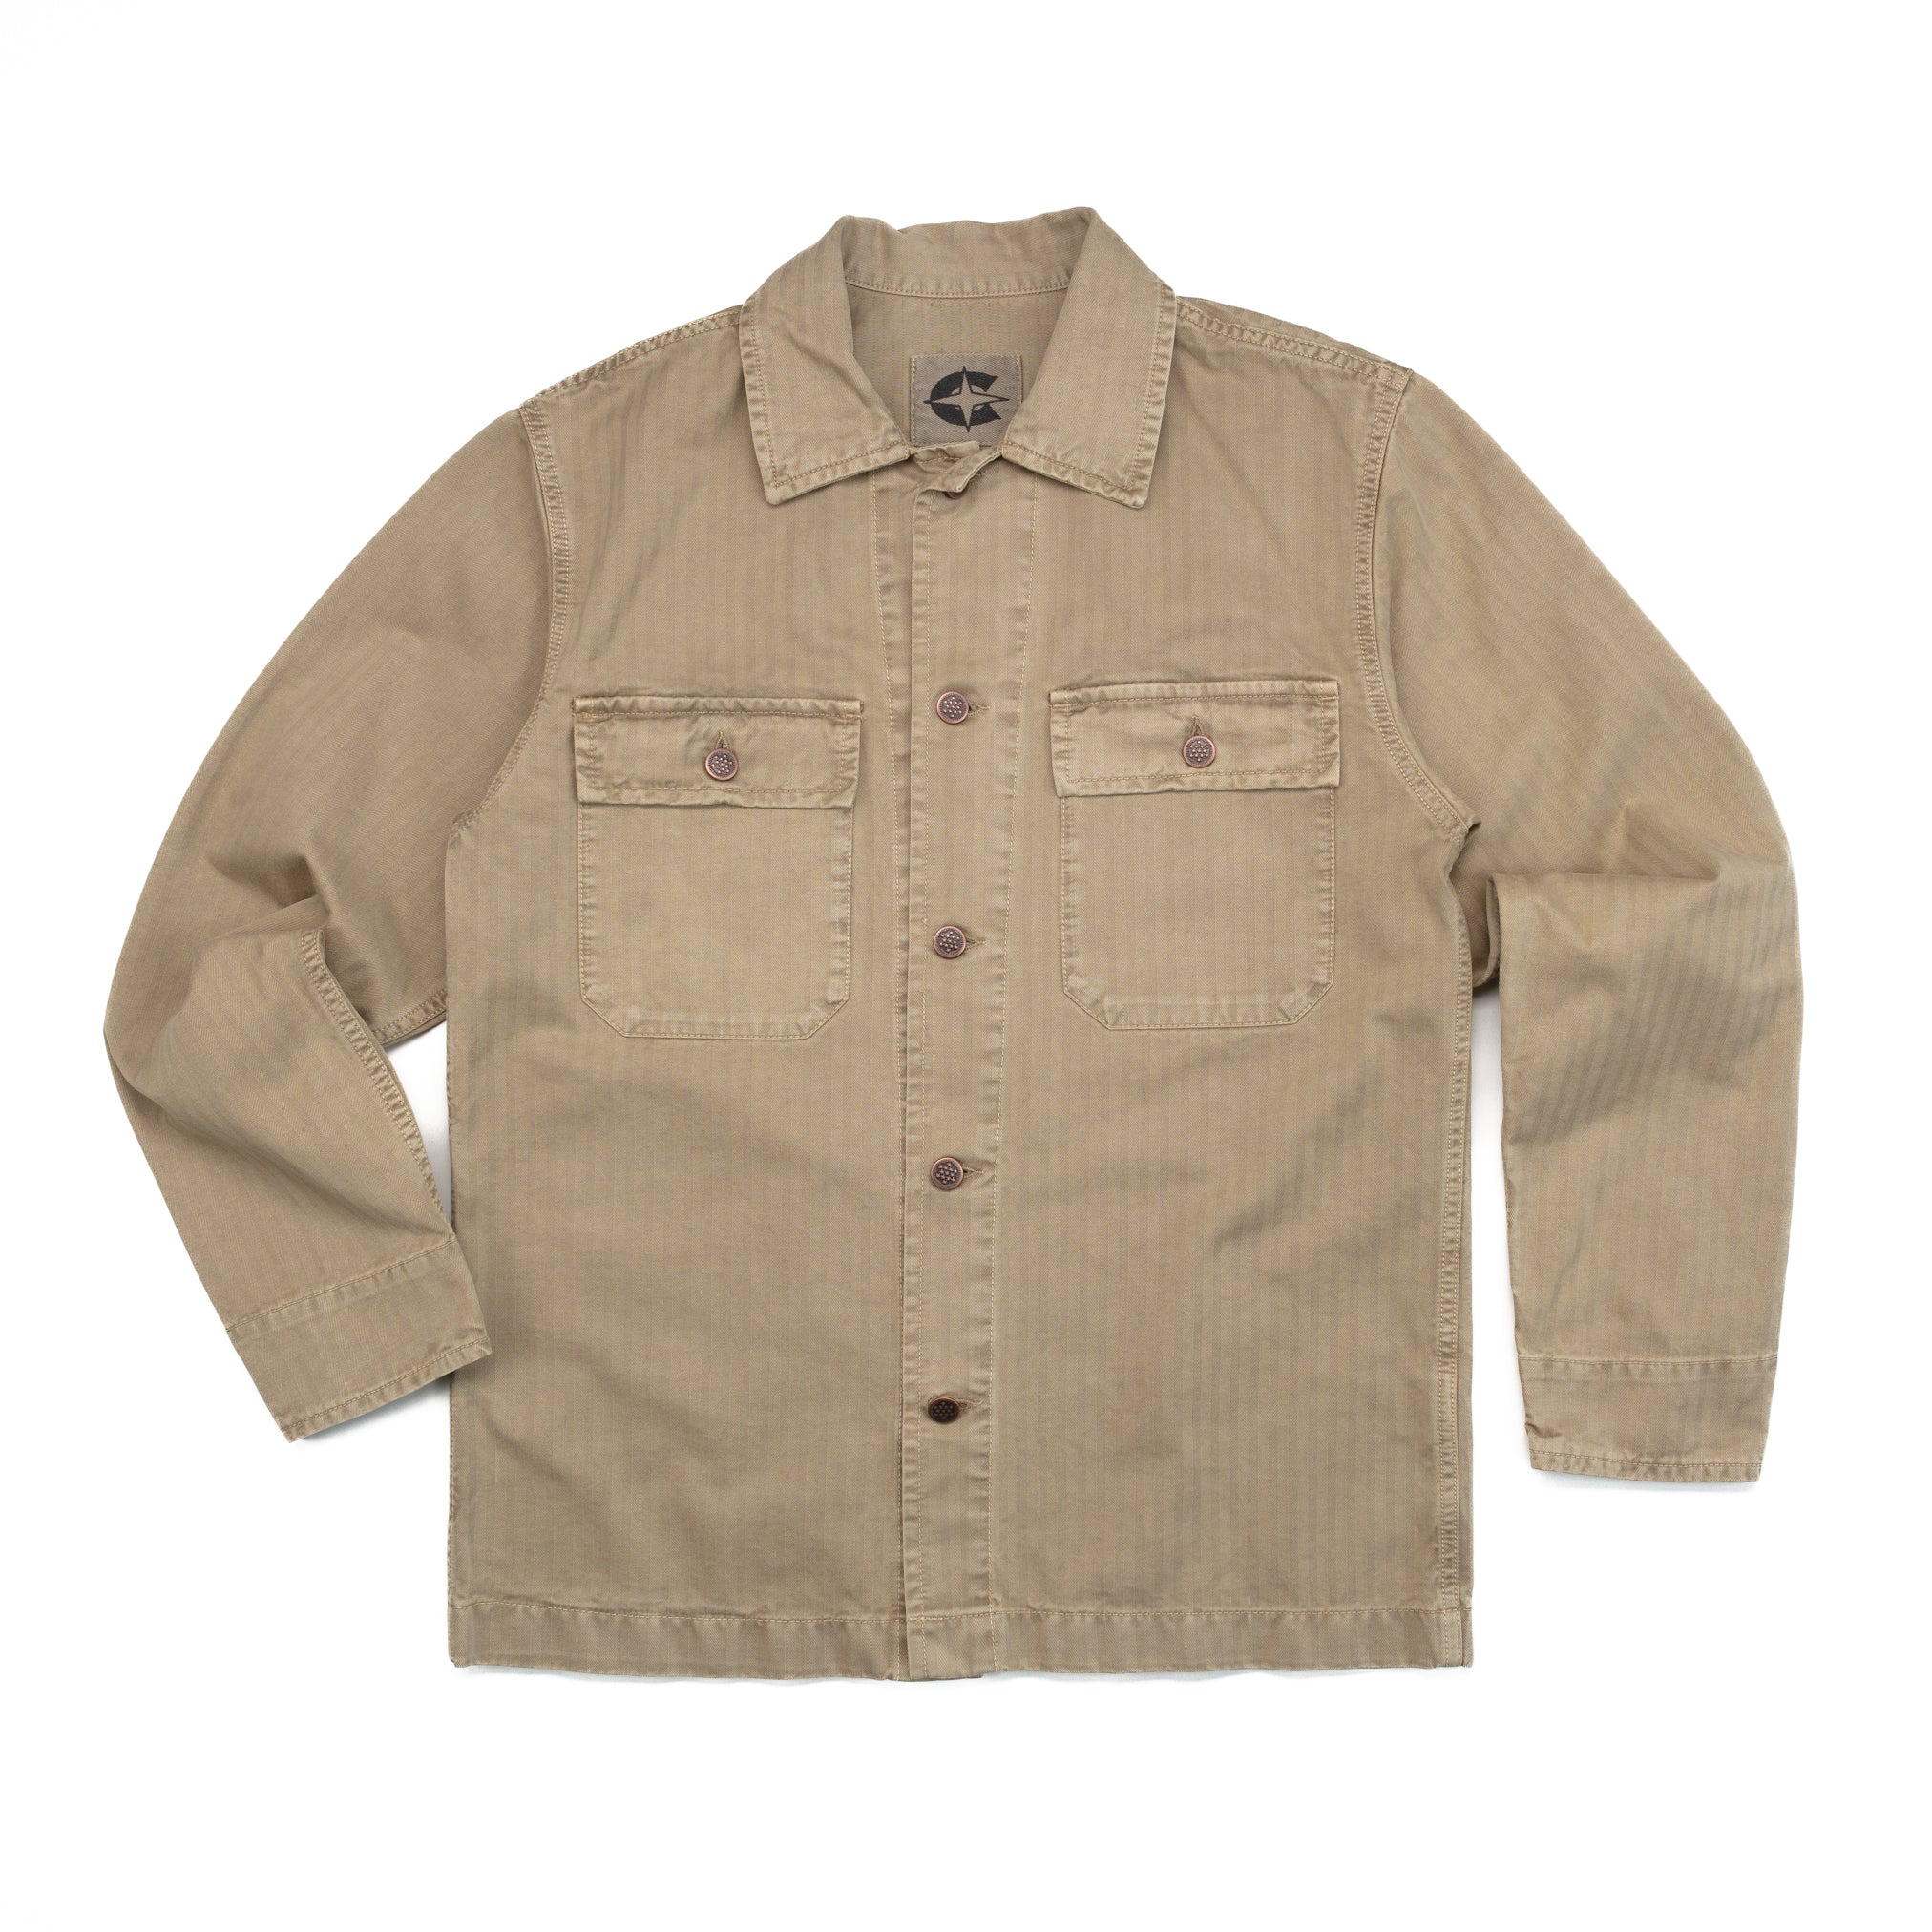 Willy's Field Shirt in Sand HBT